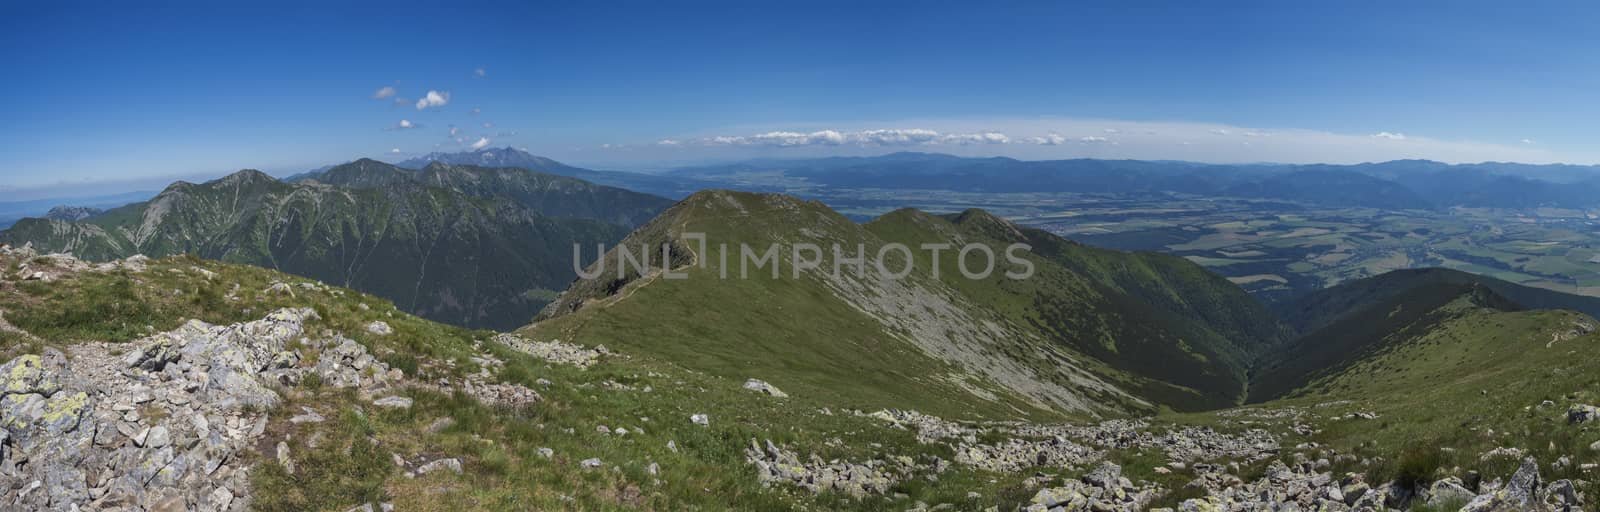 Panoramic view from Baranec peak on Western Tatra mountains Rohace, high tatras and low tatras panorama. Sharp green mountain peaks with hiking trail on ridge. Summer, blue sky white clouds. by Henkeova